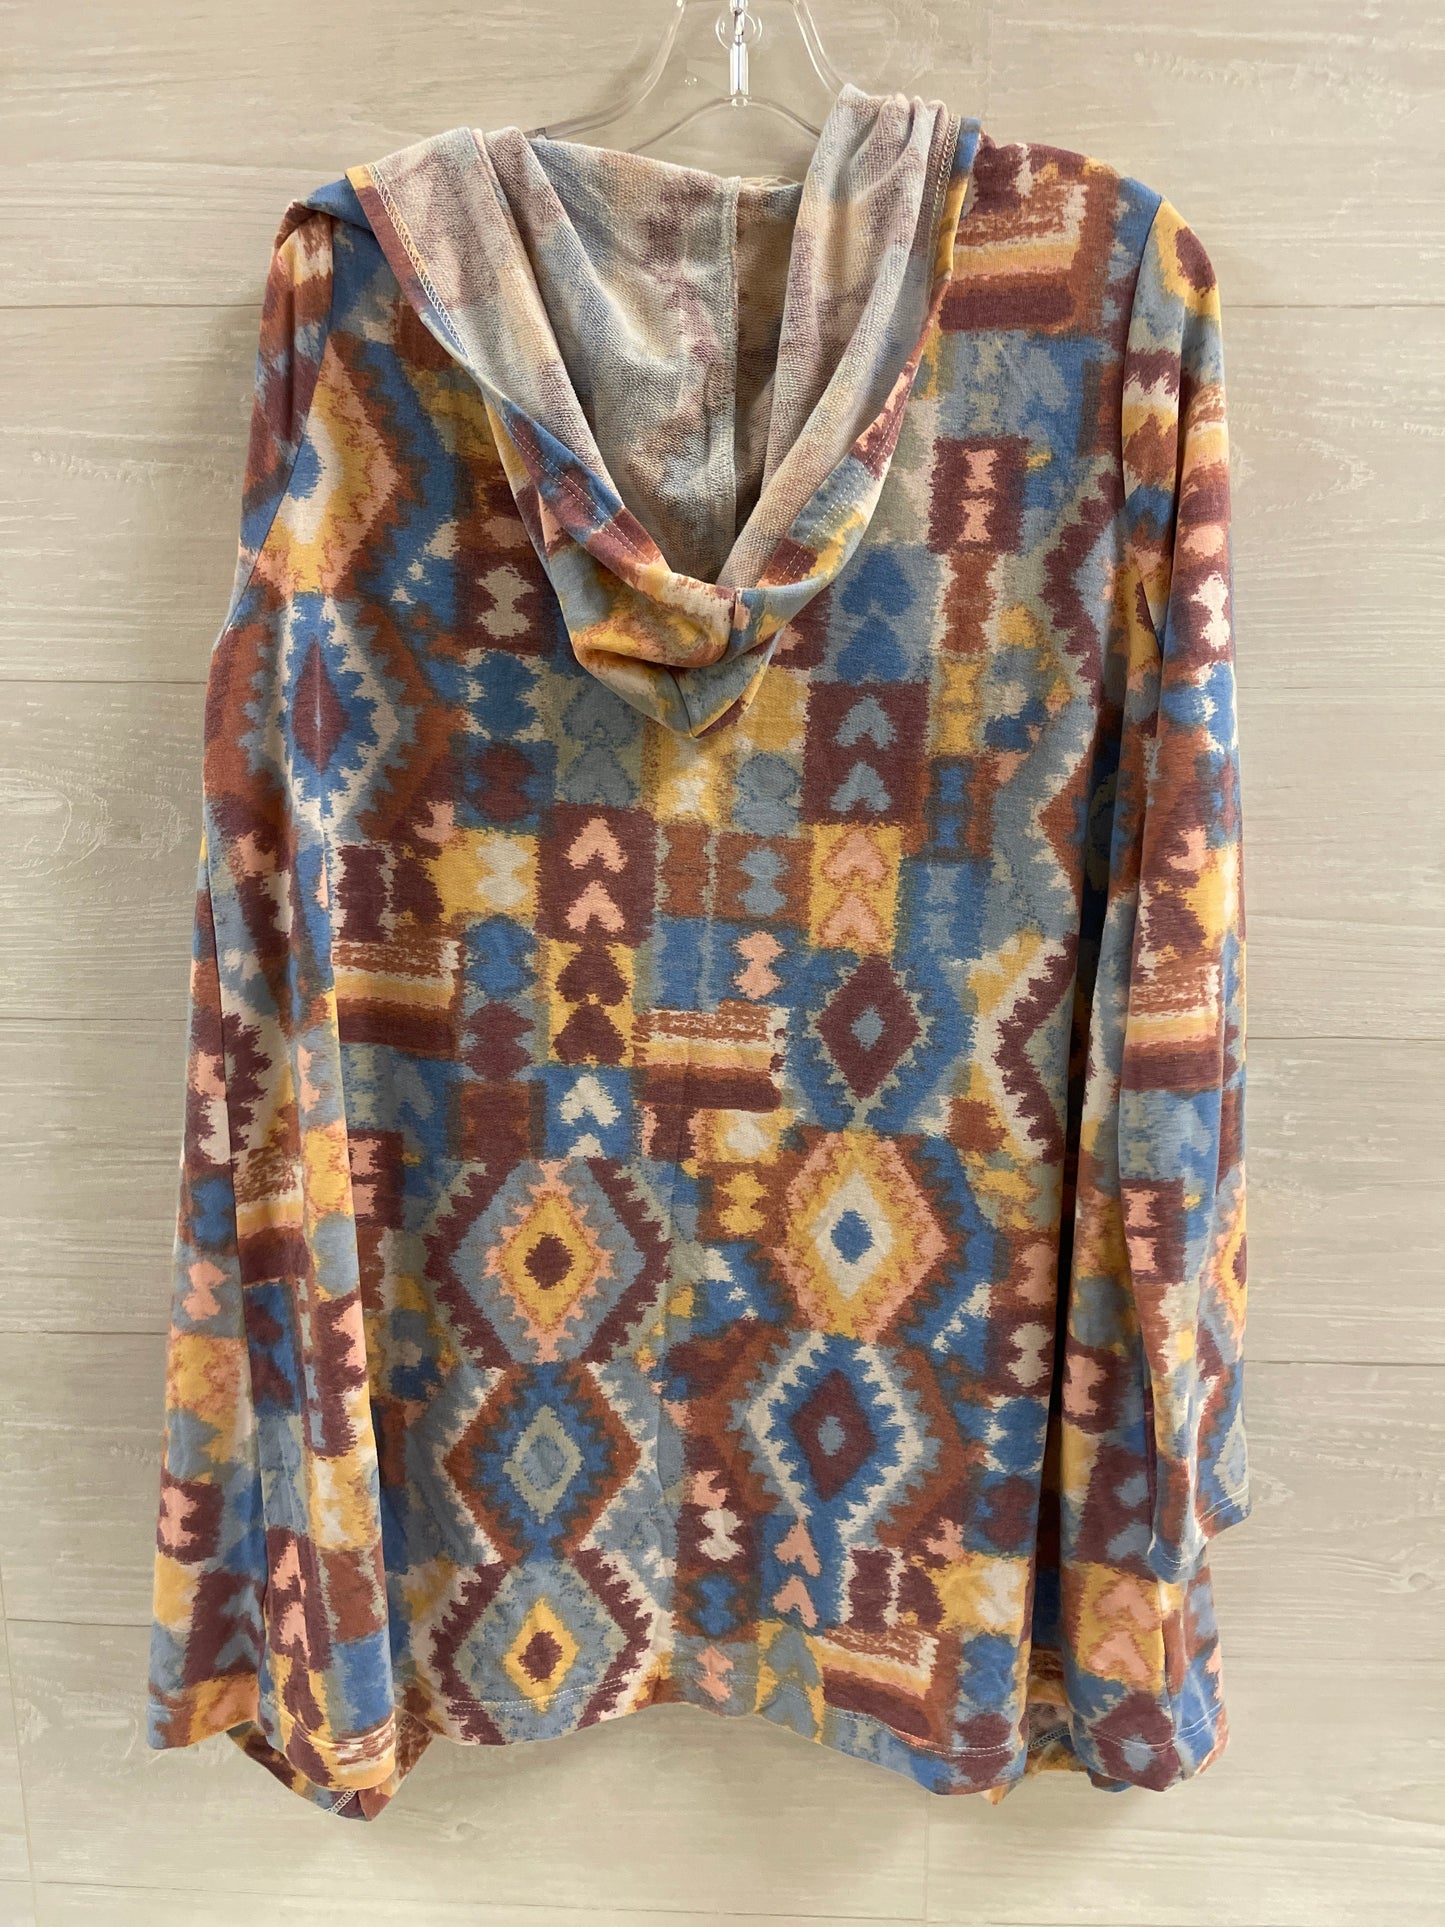 Cardigan By Clothes Mentor  Size: L